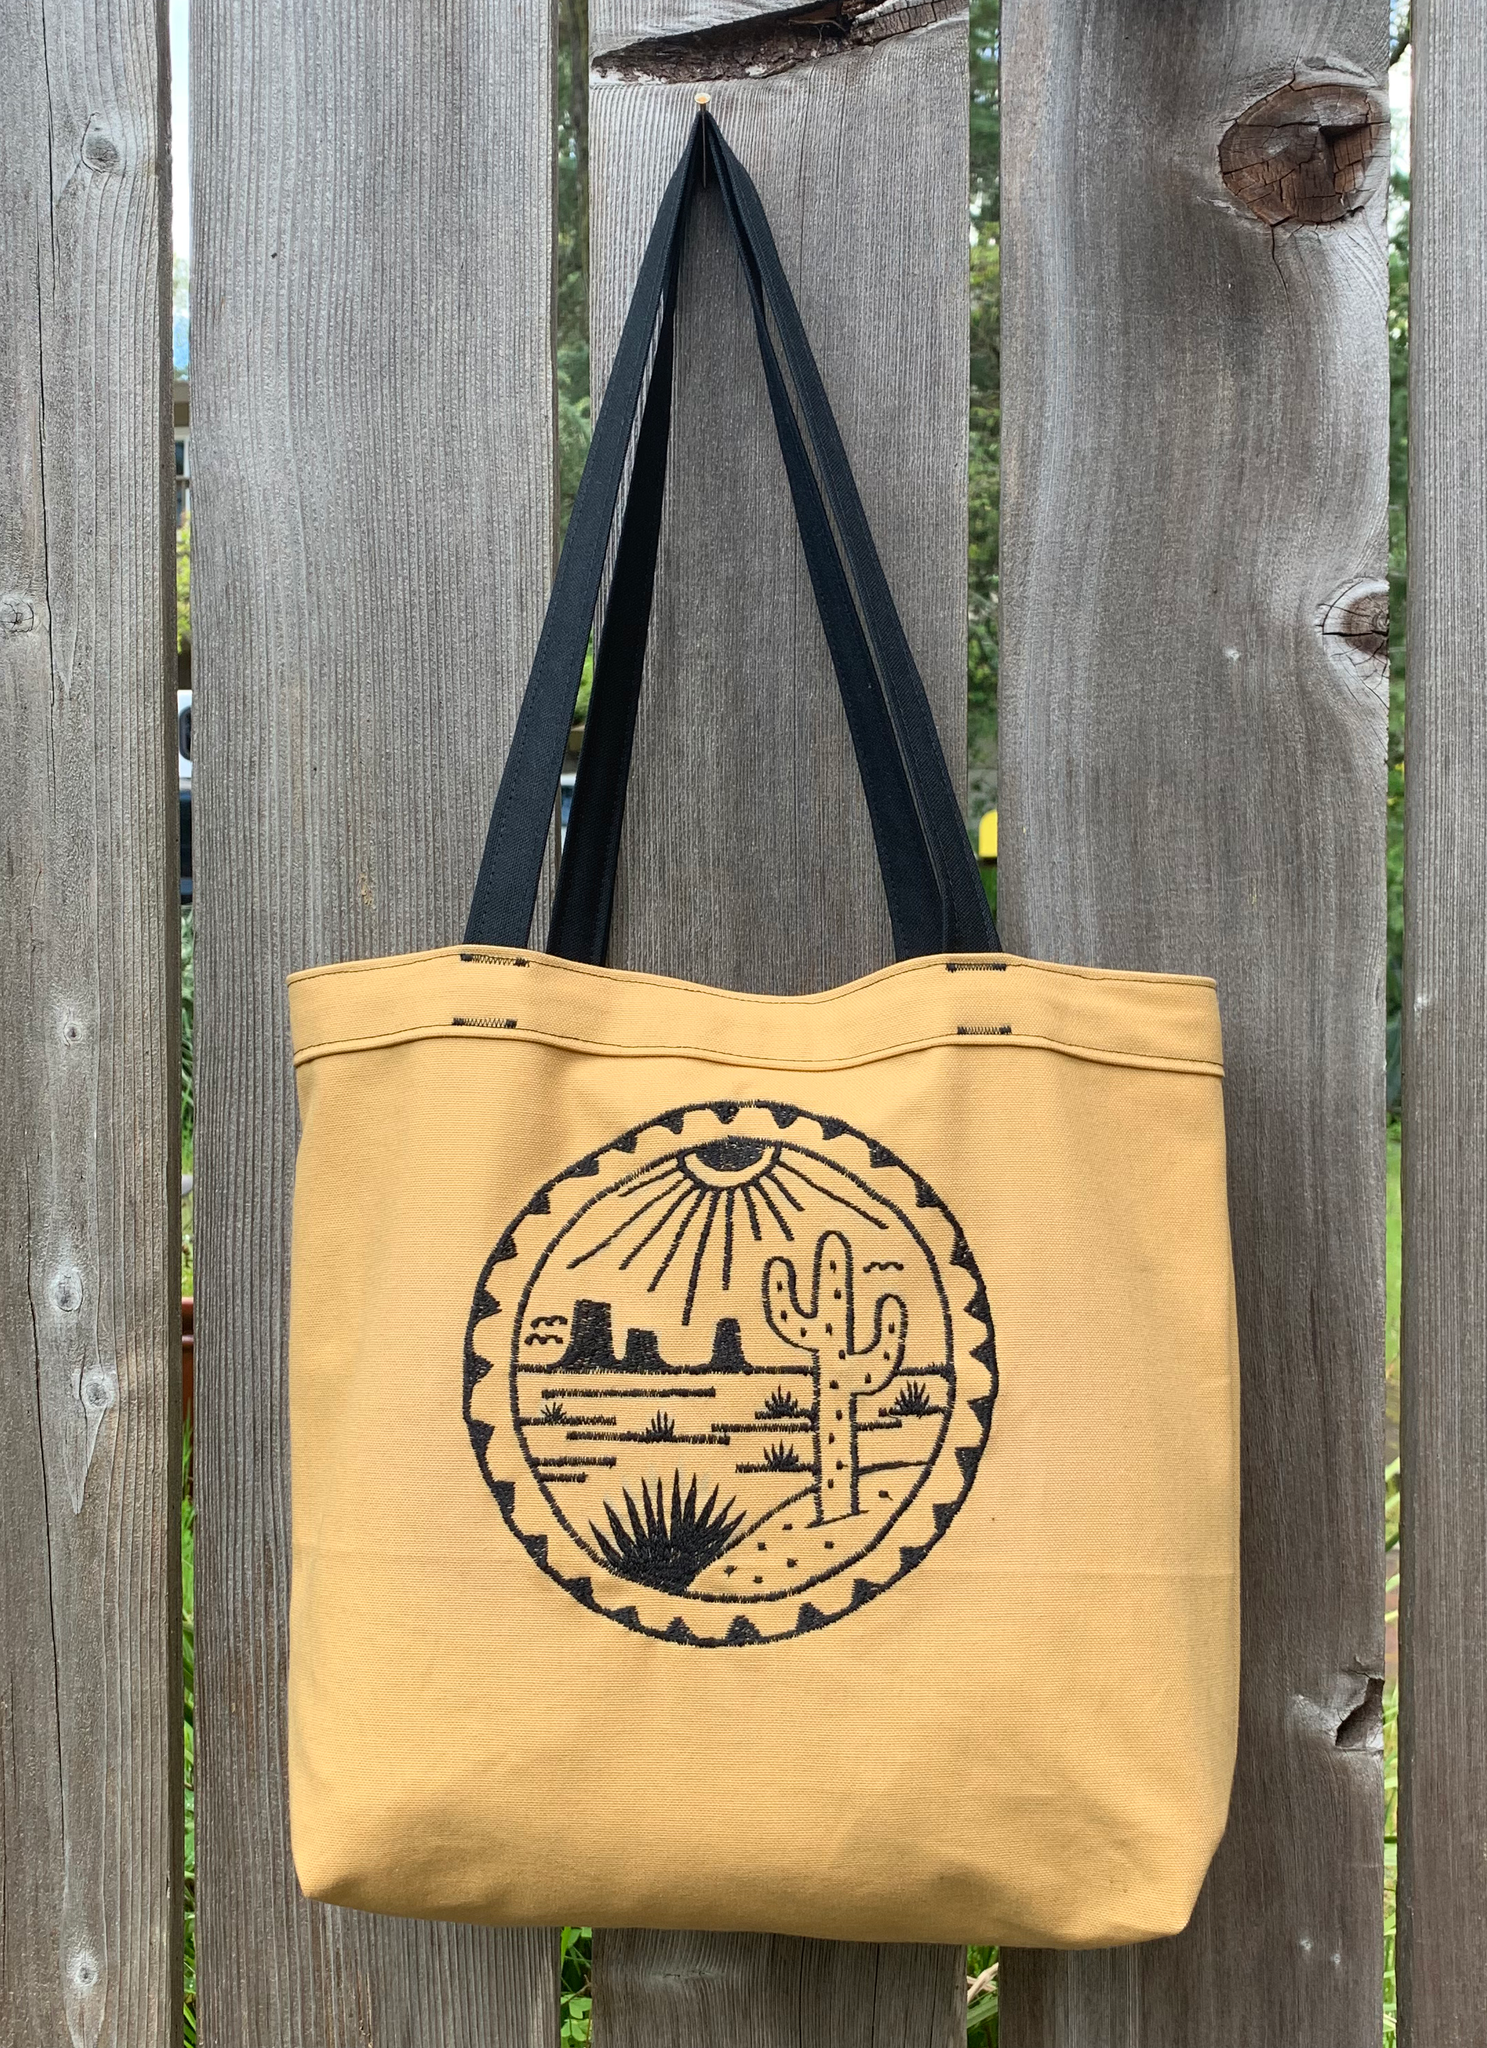 freehand machine embroidery on handmade bag by artist louis bicycle. 100% cotton made in usa